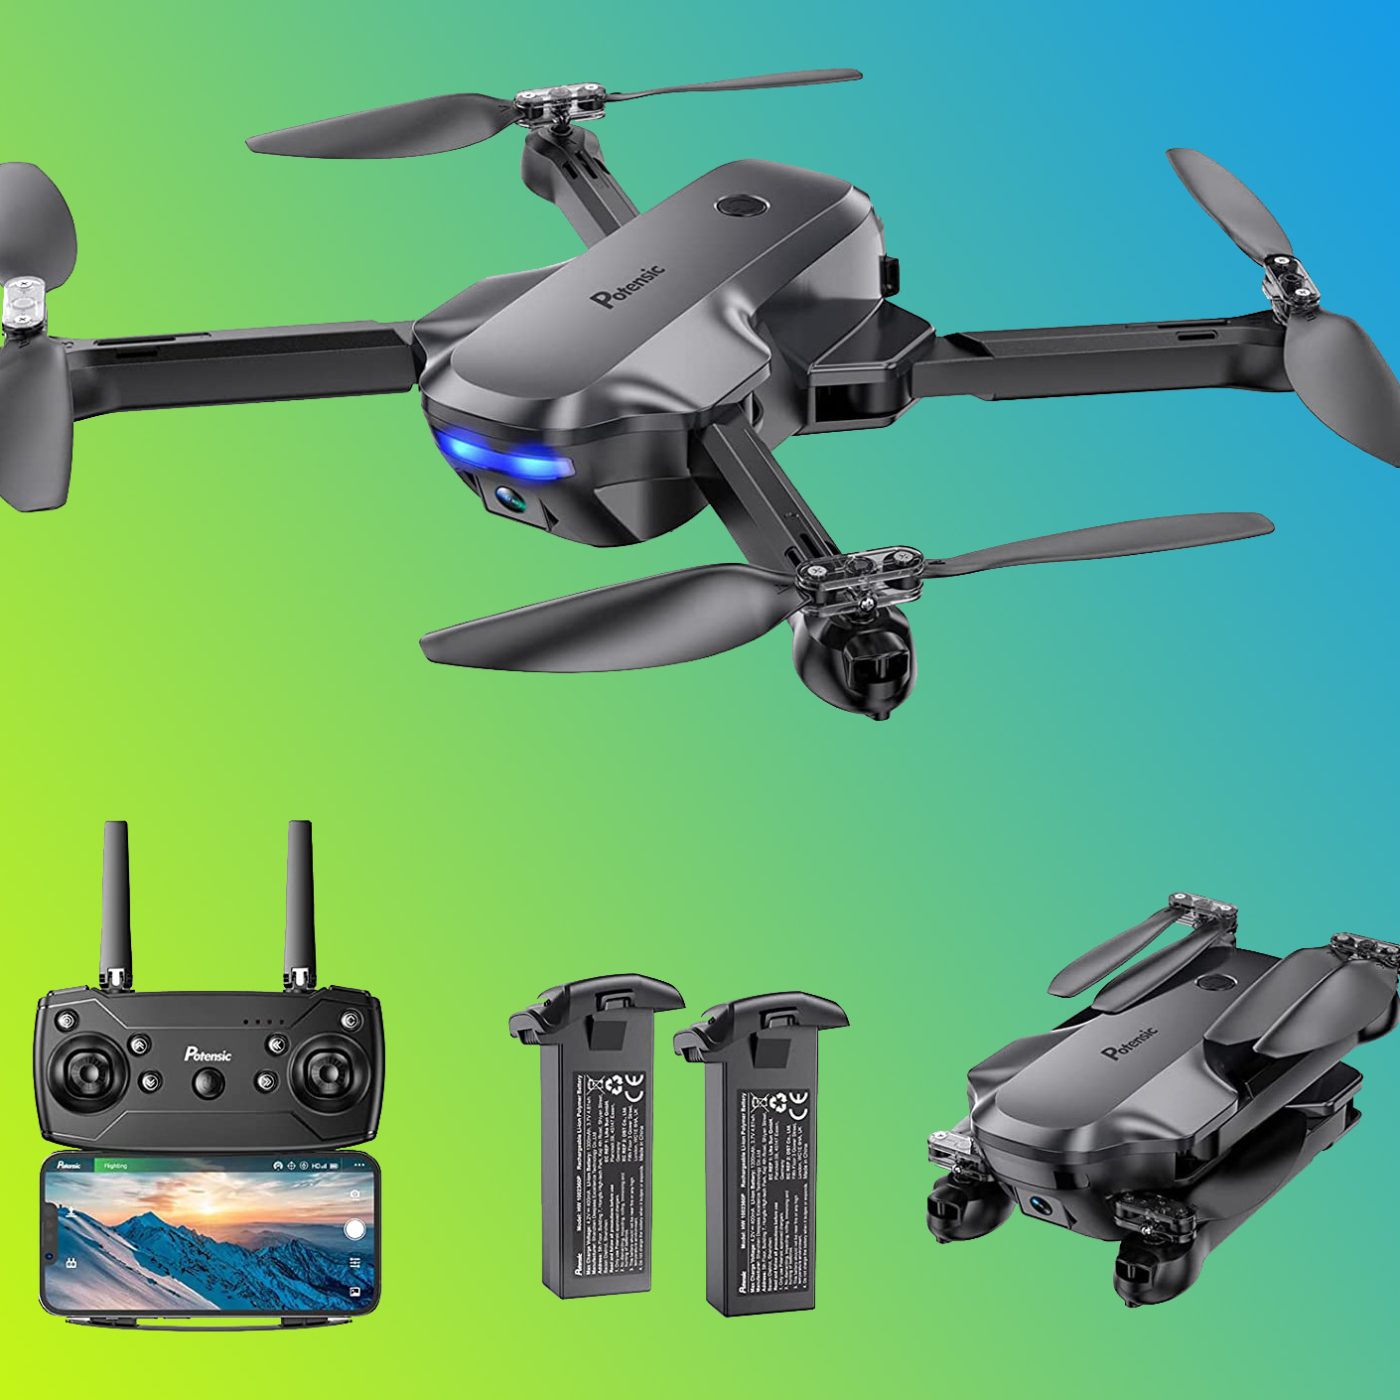 Shockingly compact foldable camera drone is on sale for $40